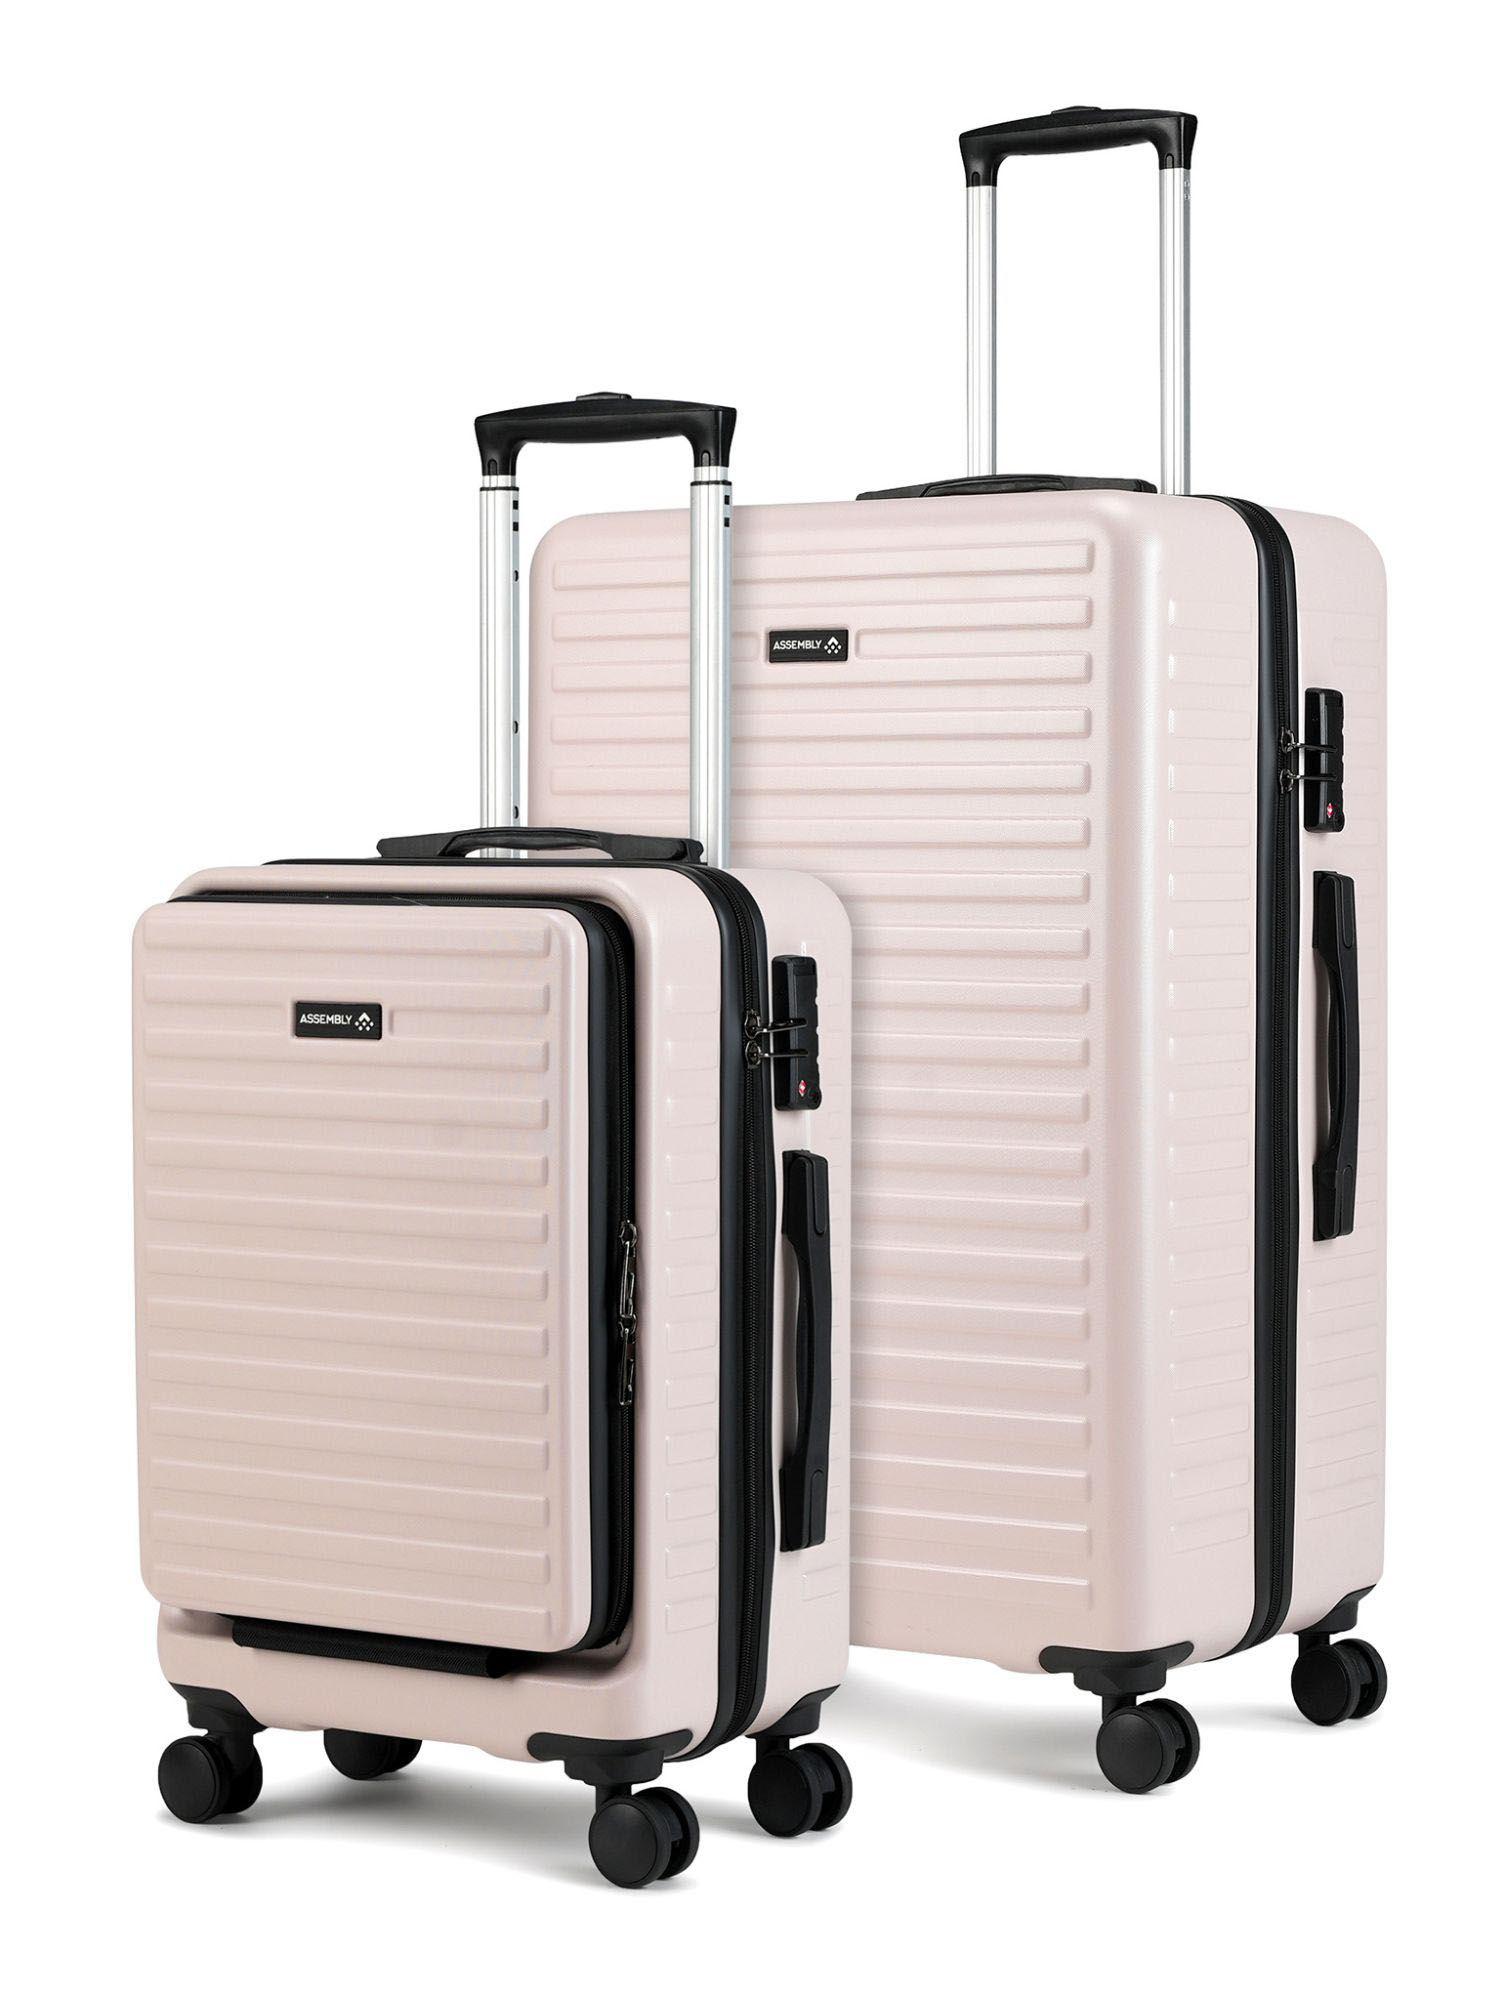 hard-luggage-set-of-2-cabin-trolley-&-large-check-in-desert-ivory